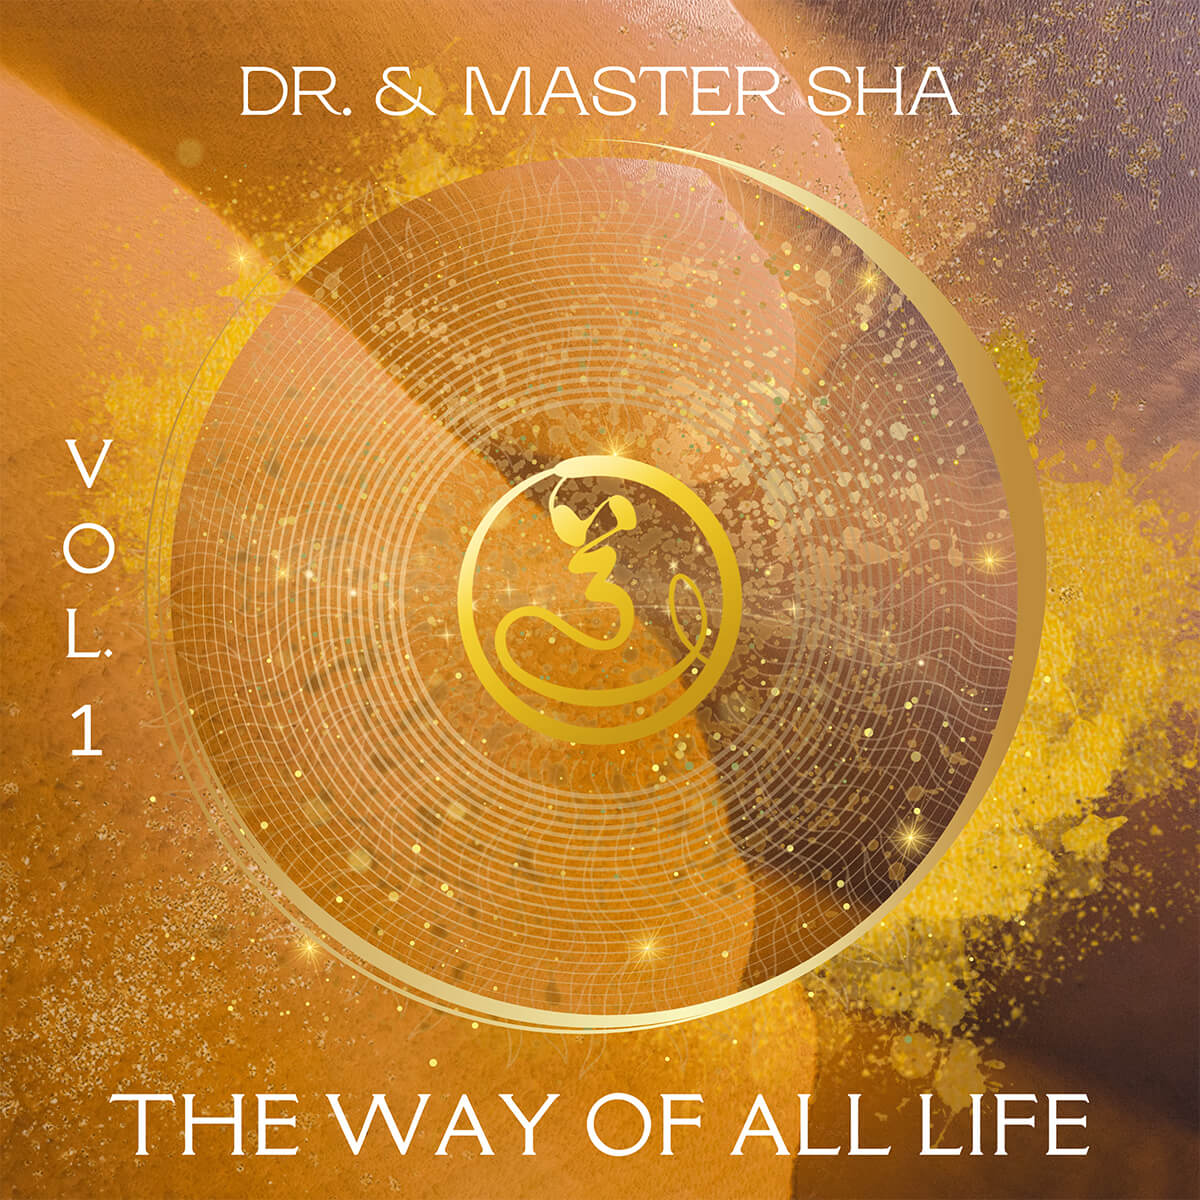 The Way of All Life Vol. 1 (CD)